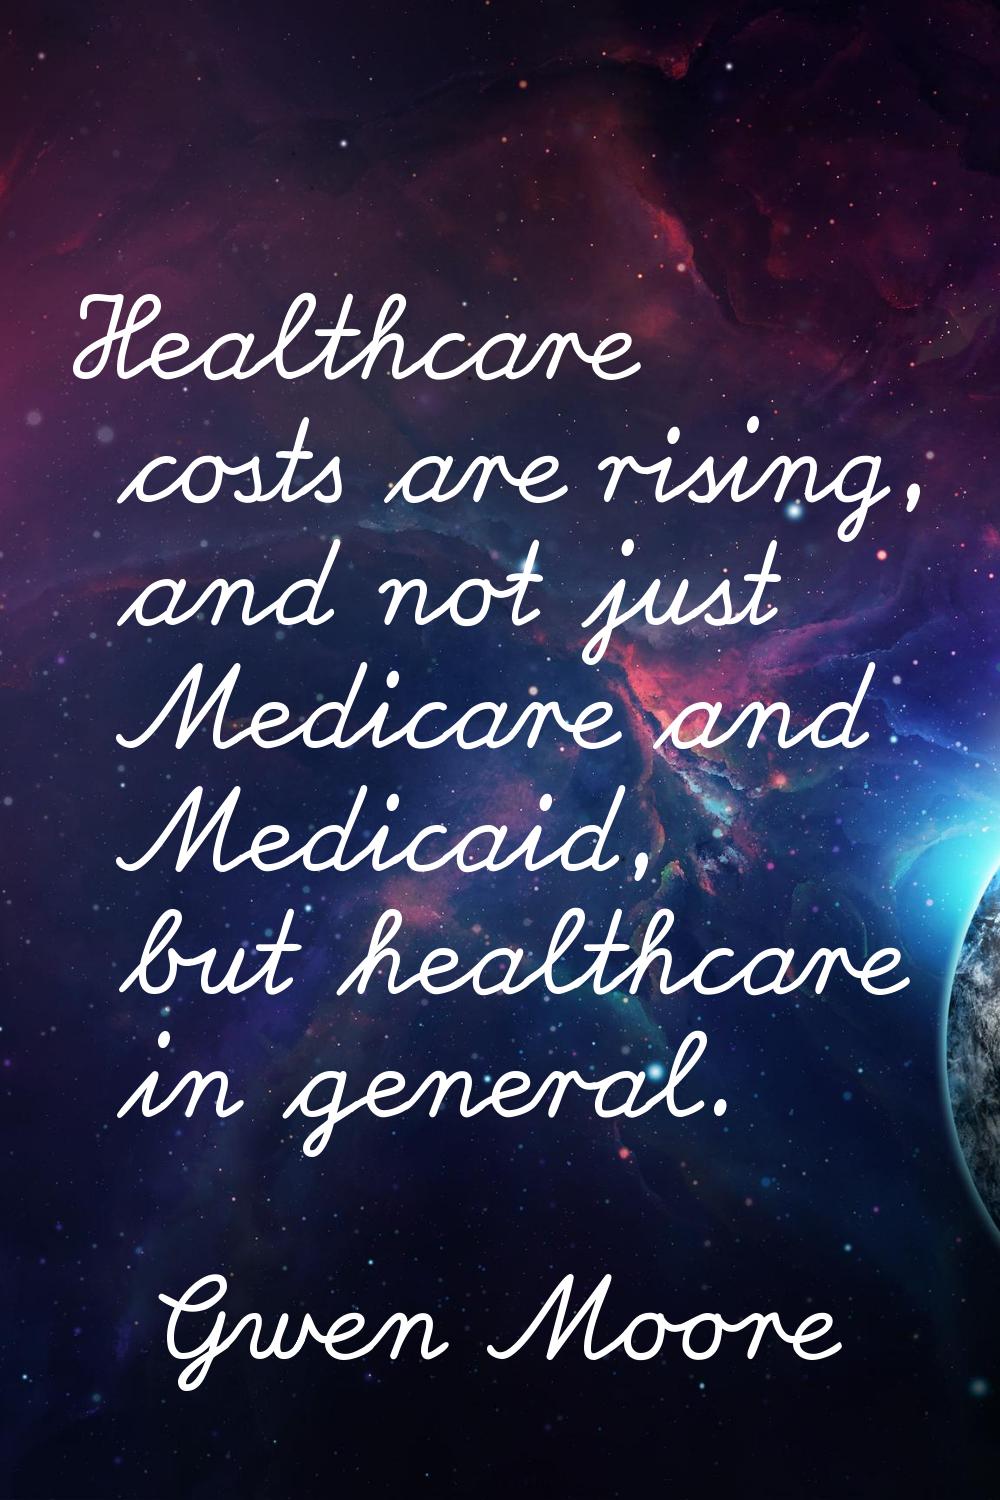 Healthcare costs are rising, and not just Medicare and Medicaid, but healthcare in general.